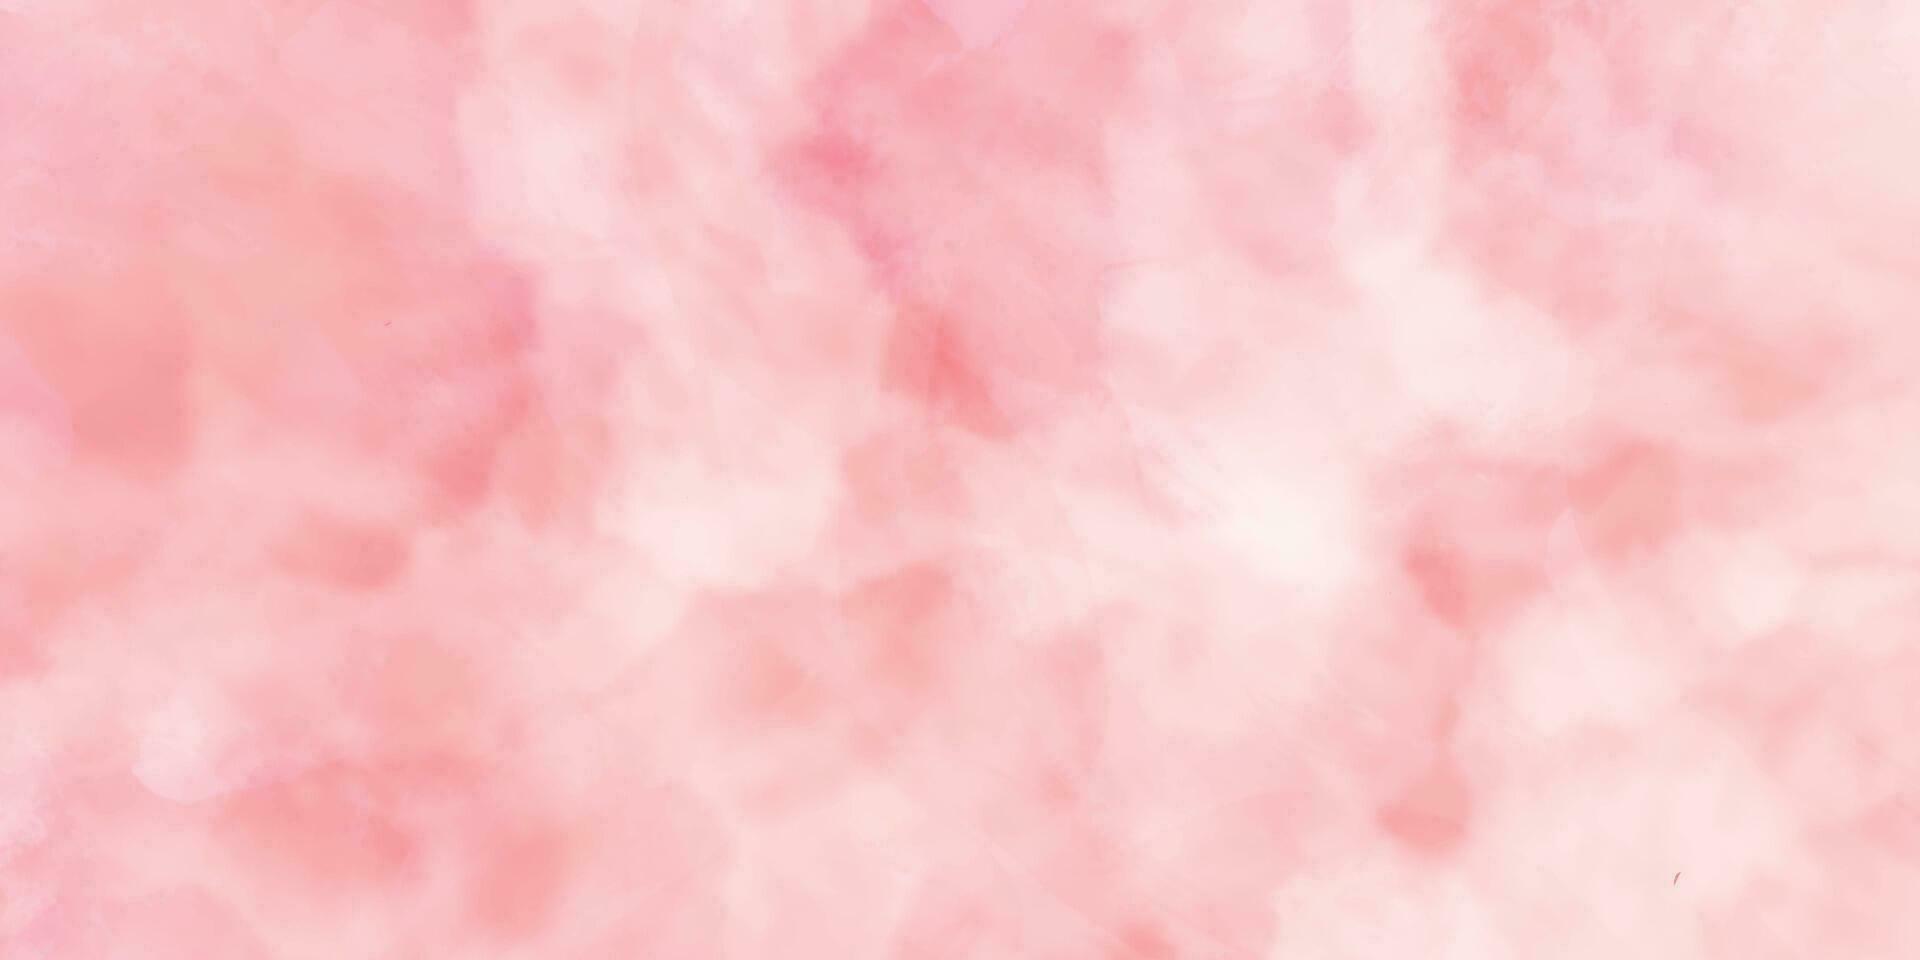 roze waterverf achtergrond. abstract waterverf grunge textuur. abstract waterverf achtergrond vector